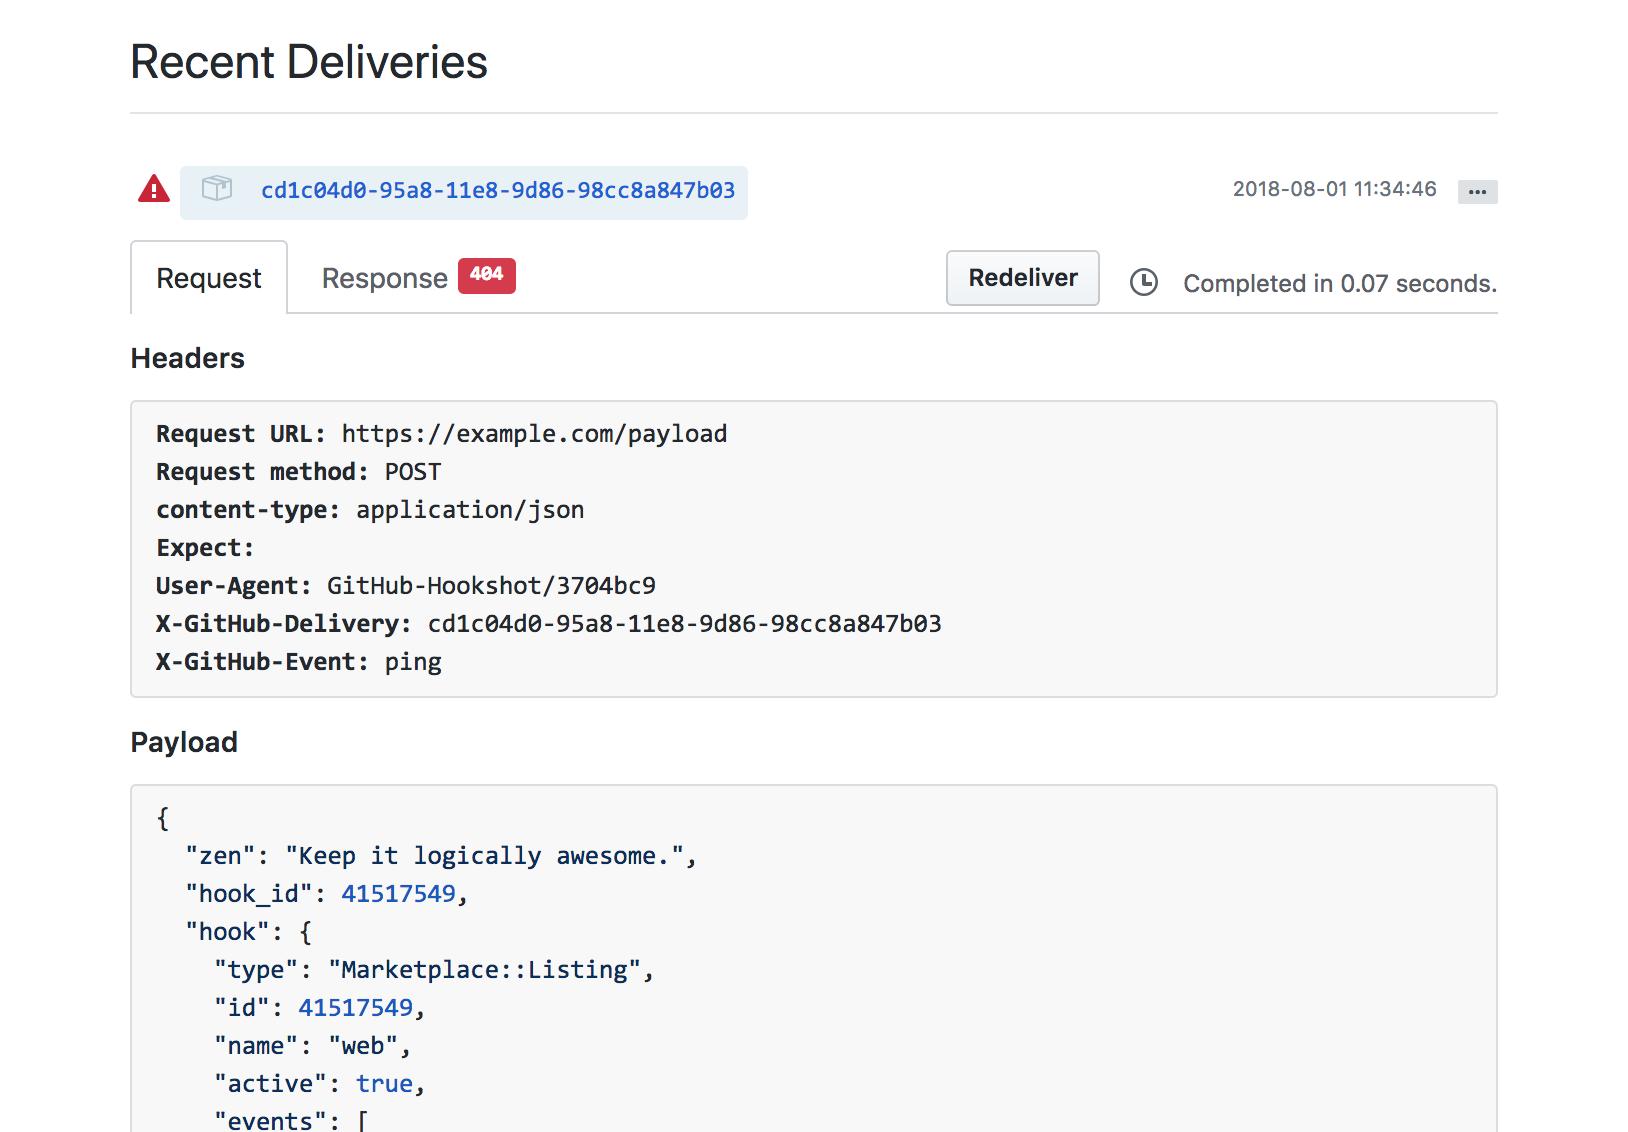 Screenshot of the recent webhook deliveries for the GitHub Marketplace listing.